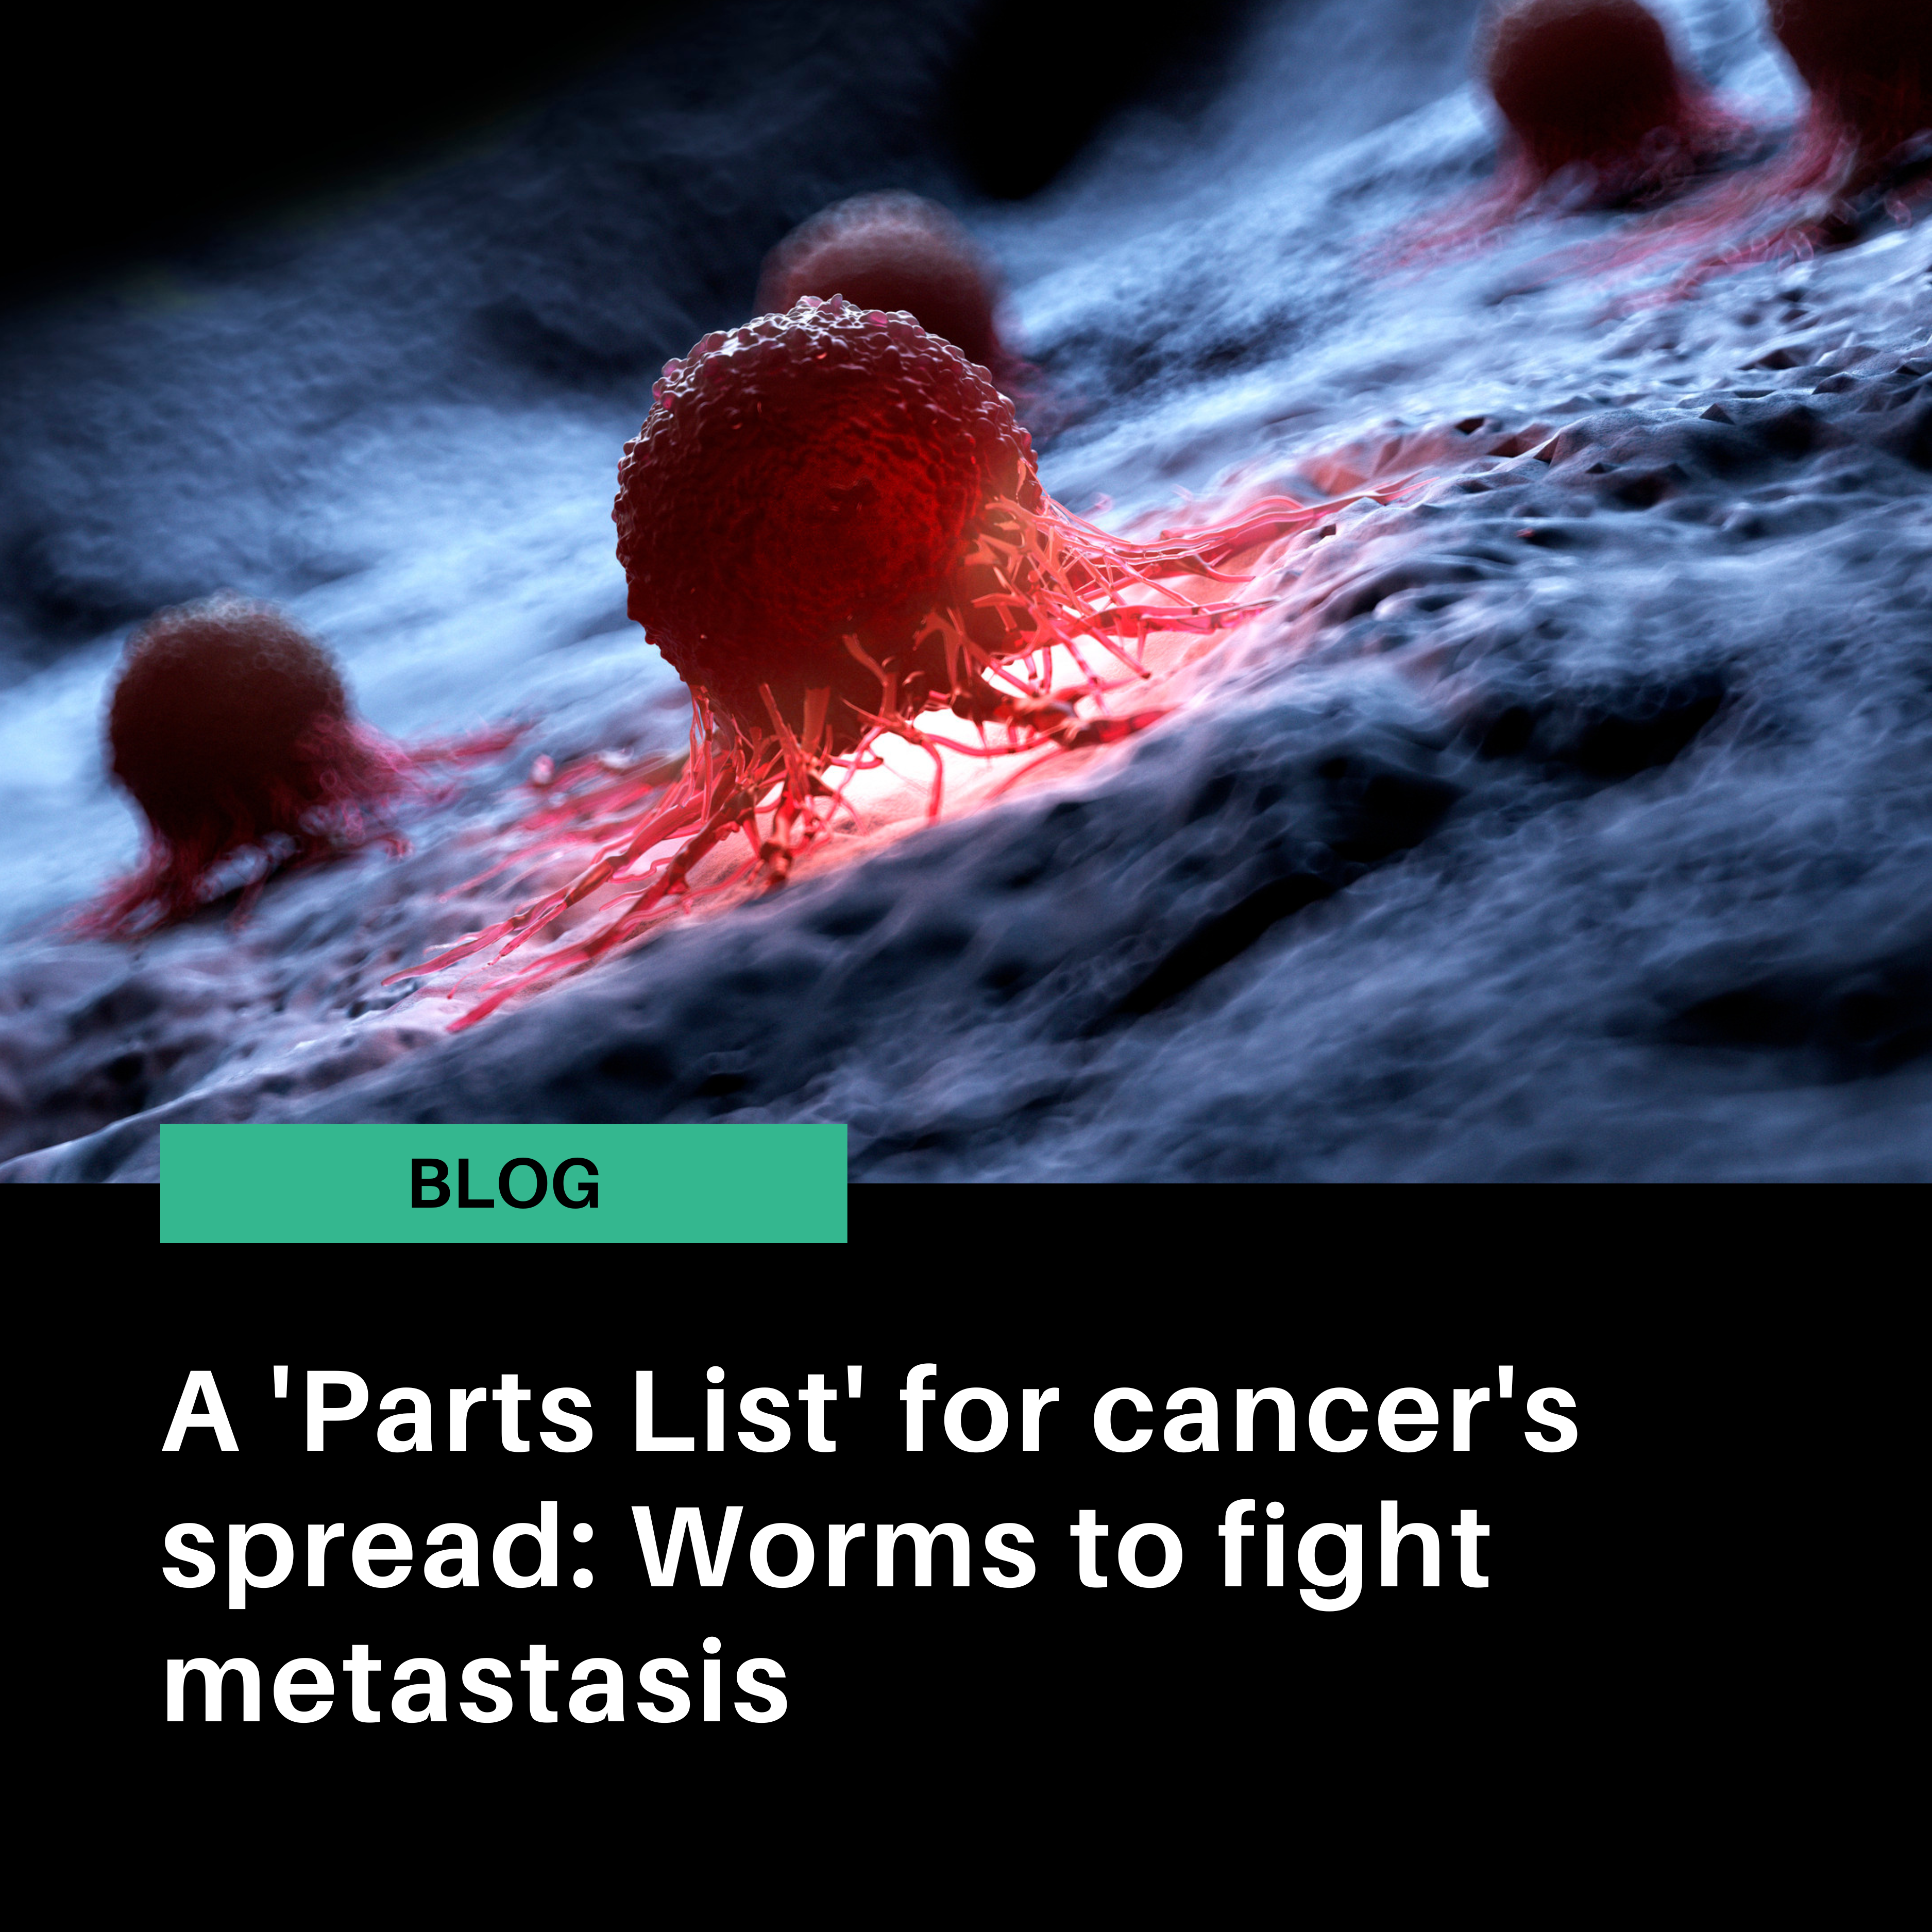 A ‘Parts List’ for cancer’s spread: Worms to fight metastasis